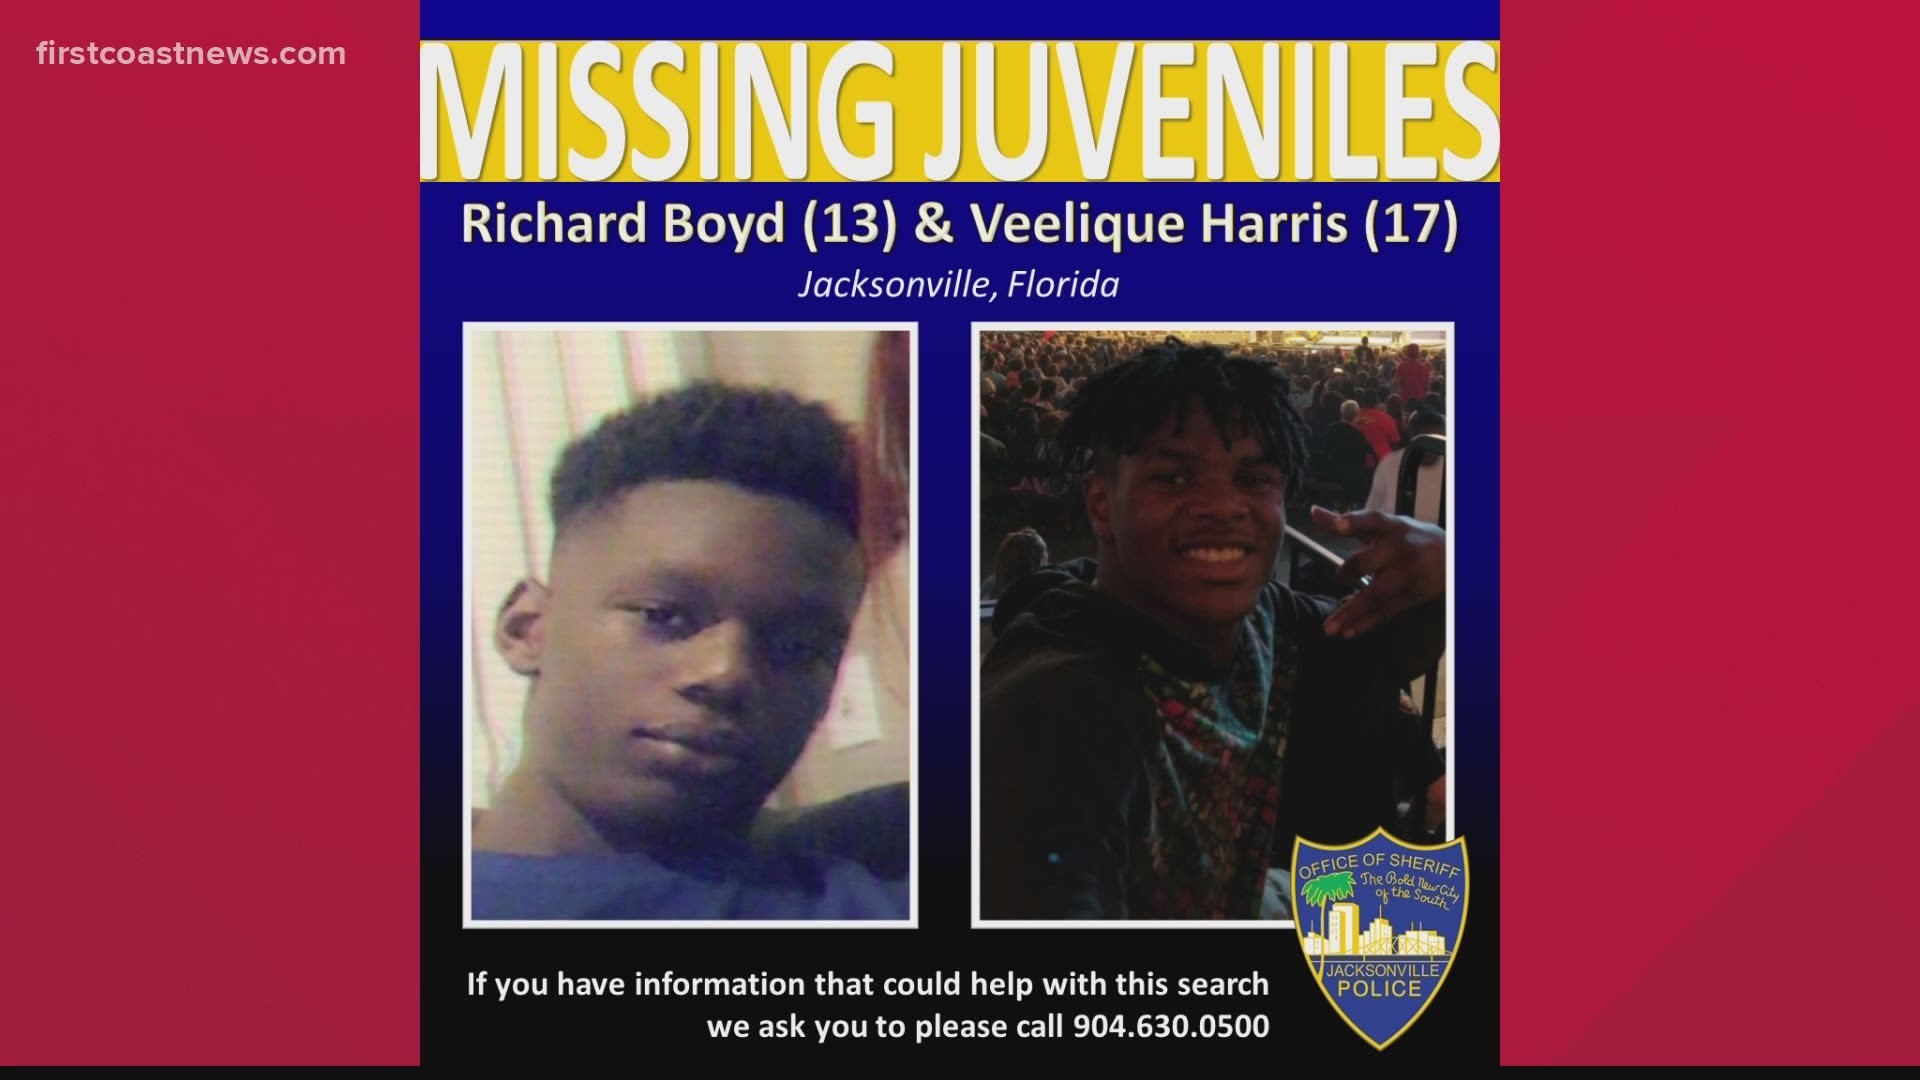 The Jacksonville Sheriff's Office says 13-year-old Richard Boyd and 17-year-old Veelique Harris were last seen in the Jacksonville Heights area.